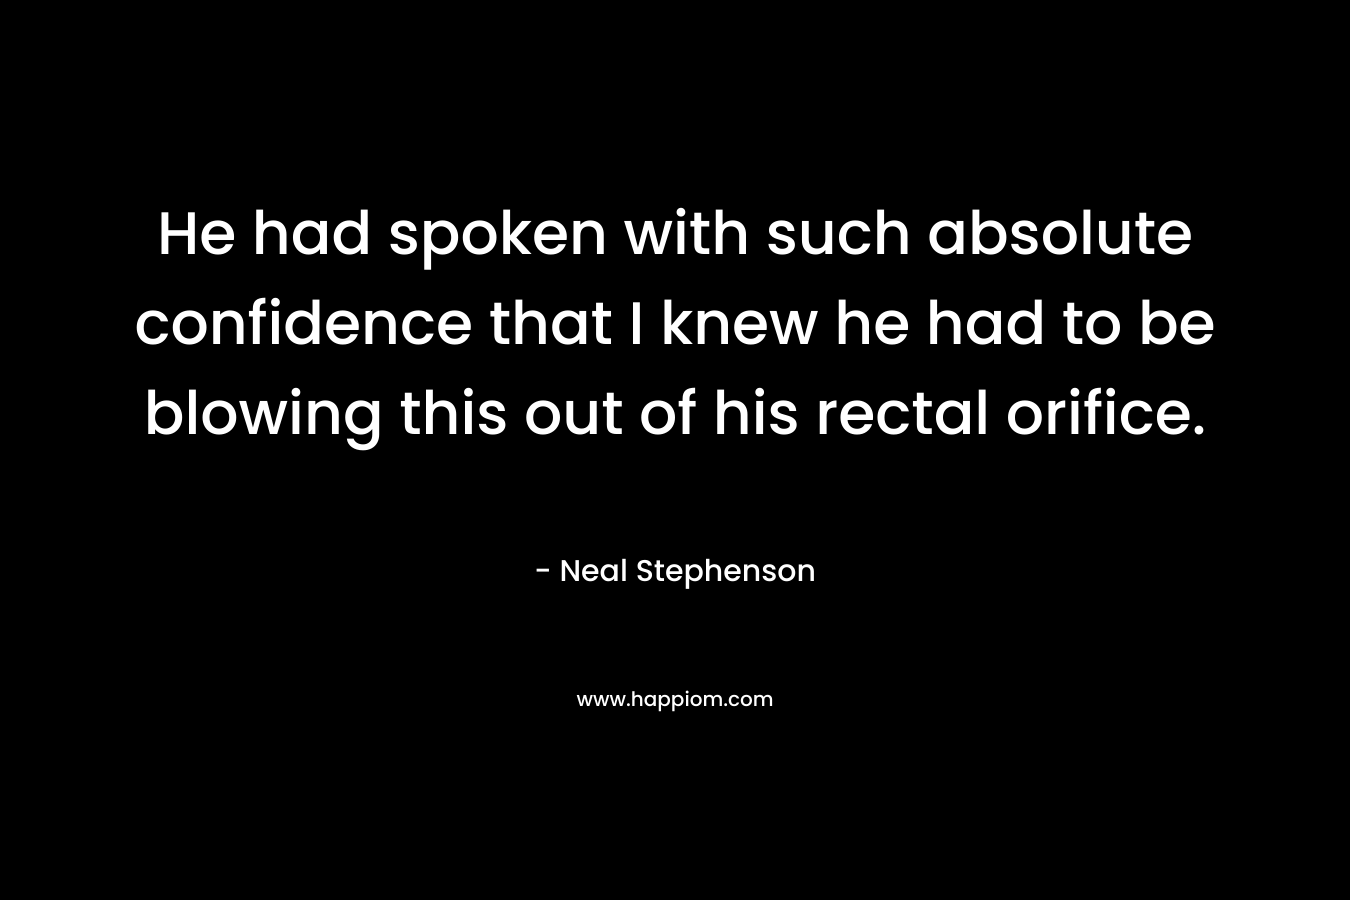 He had spoken with such absolute confidence that I knew he had to be blowing this out of his rectal orifice. – Neal Stephenson